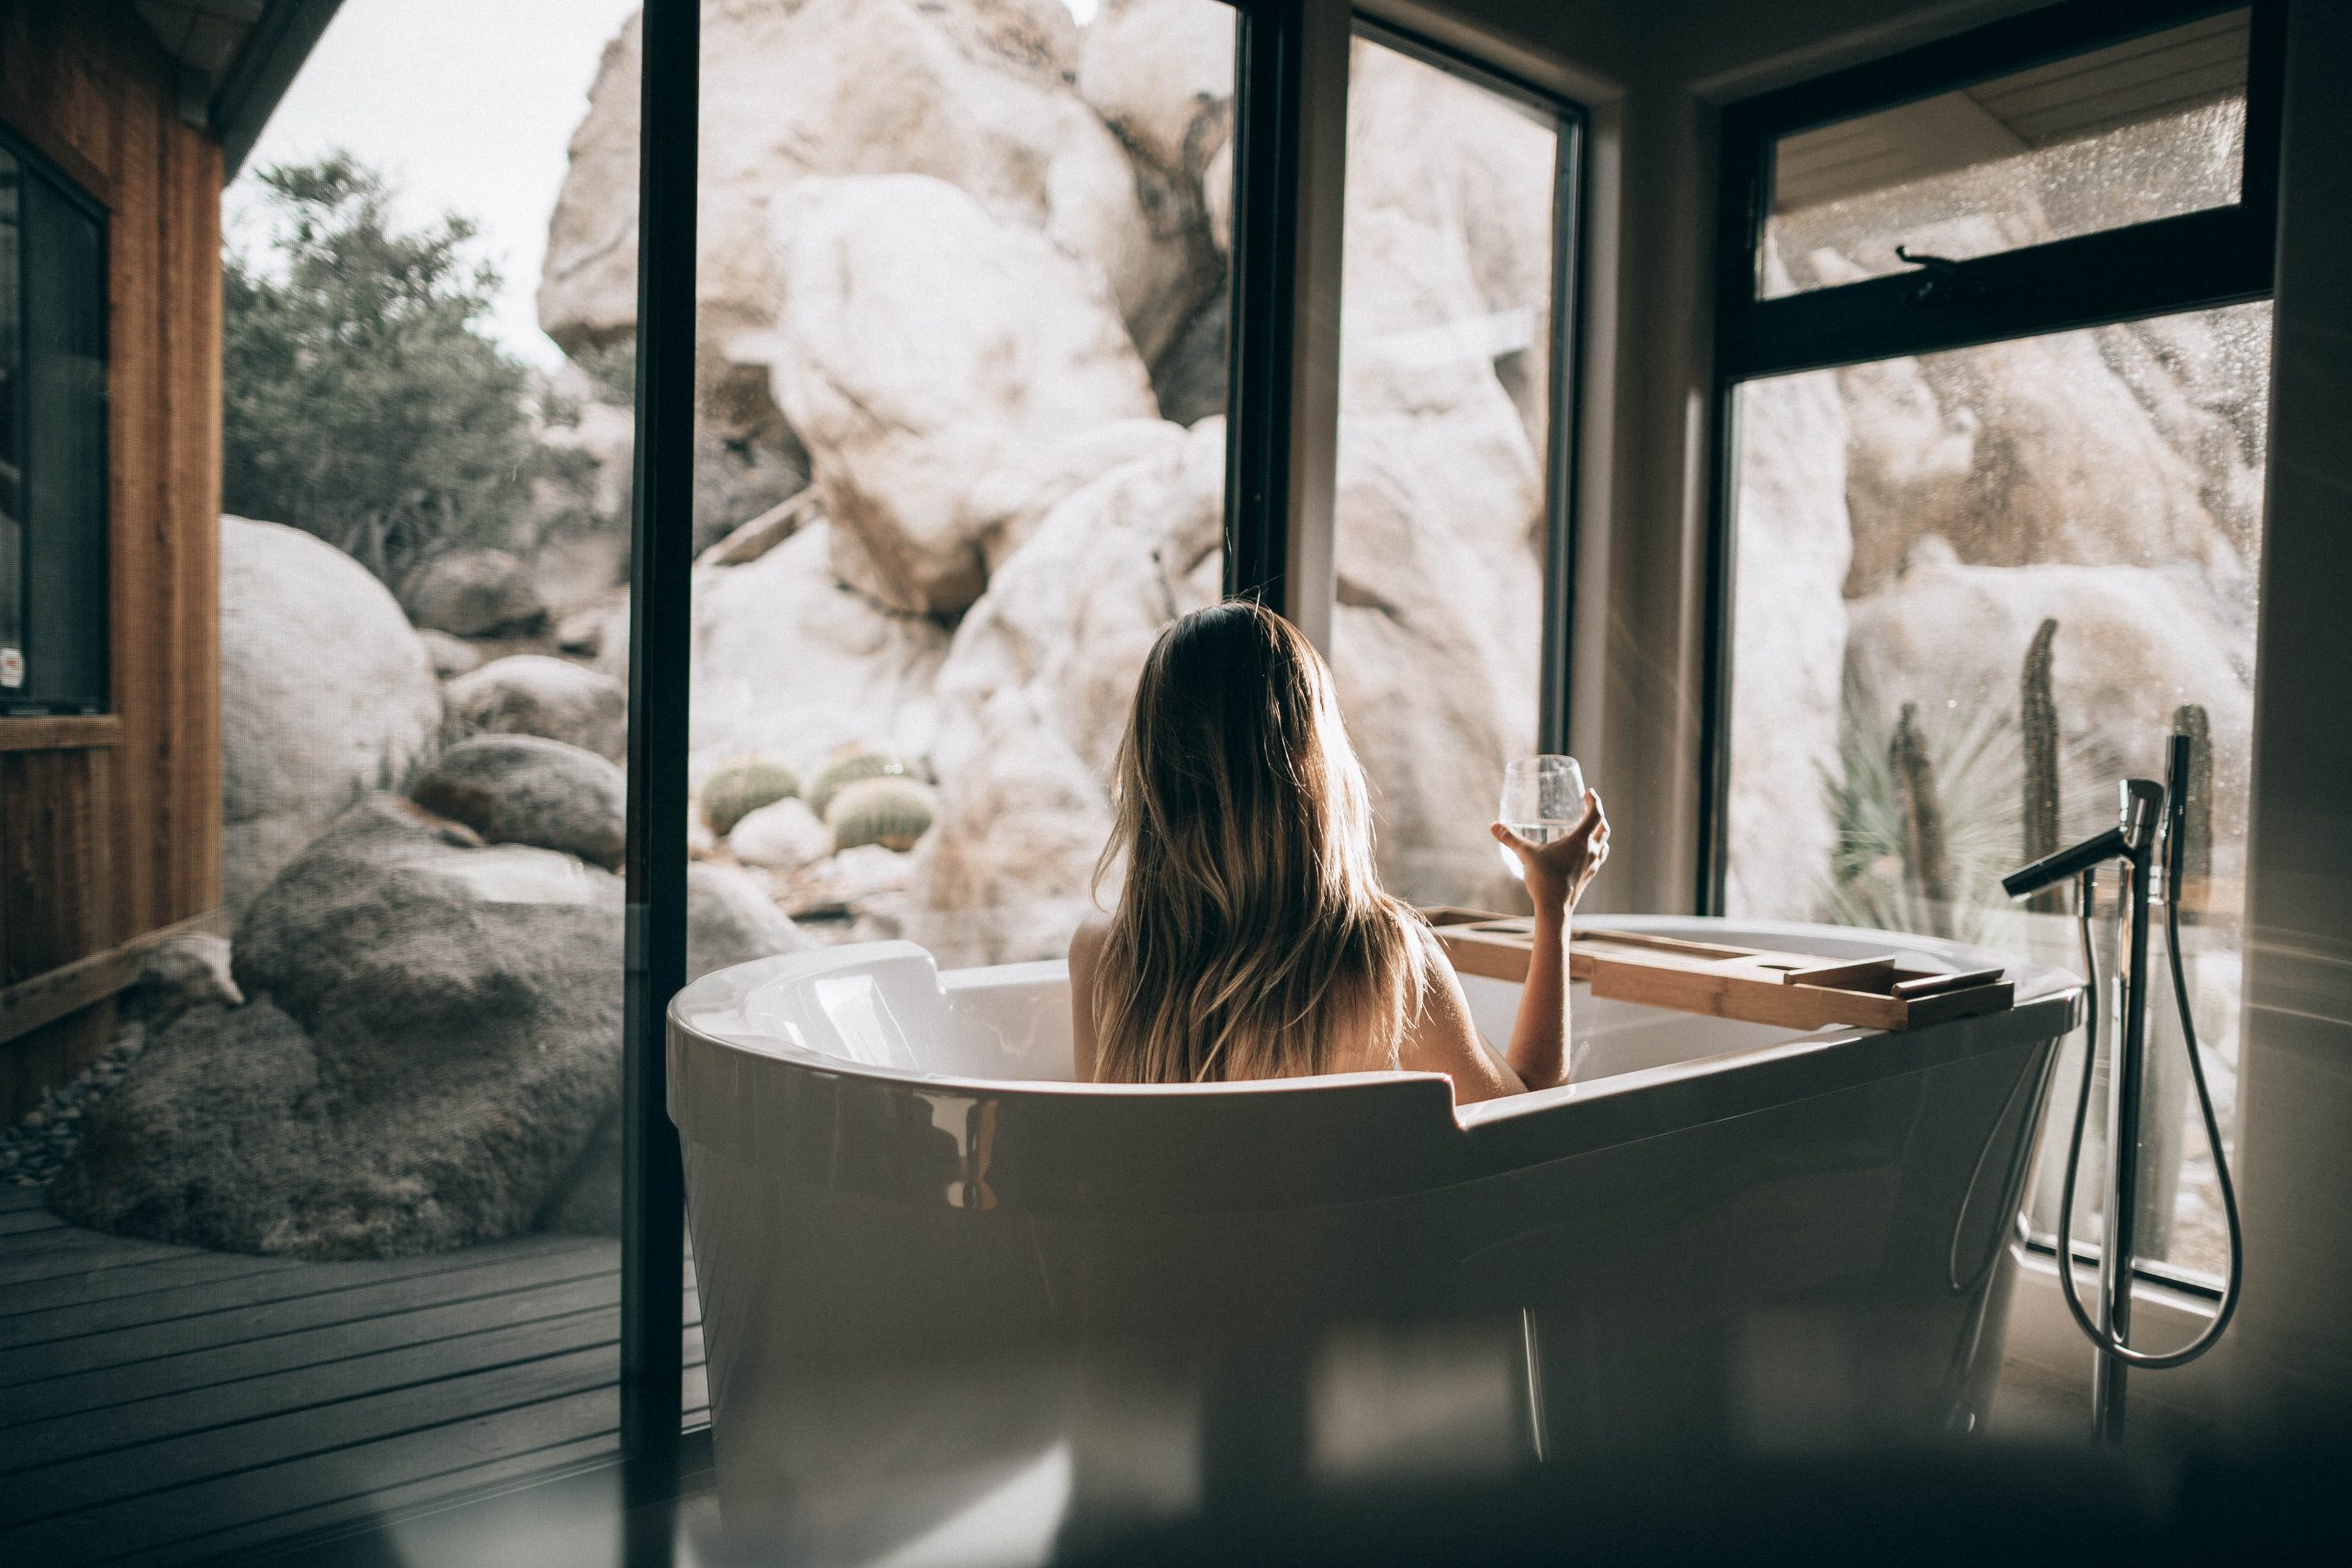 Luxury Spas Share At Home Wellness and Morning Routine Tips